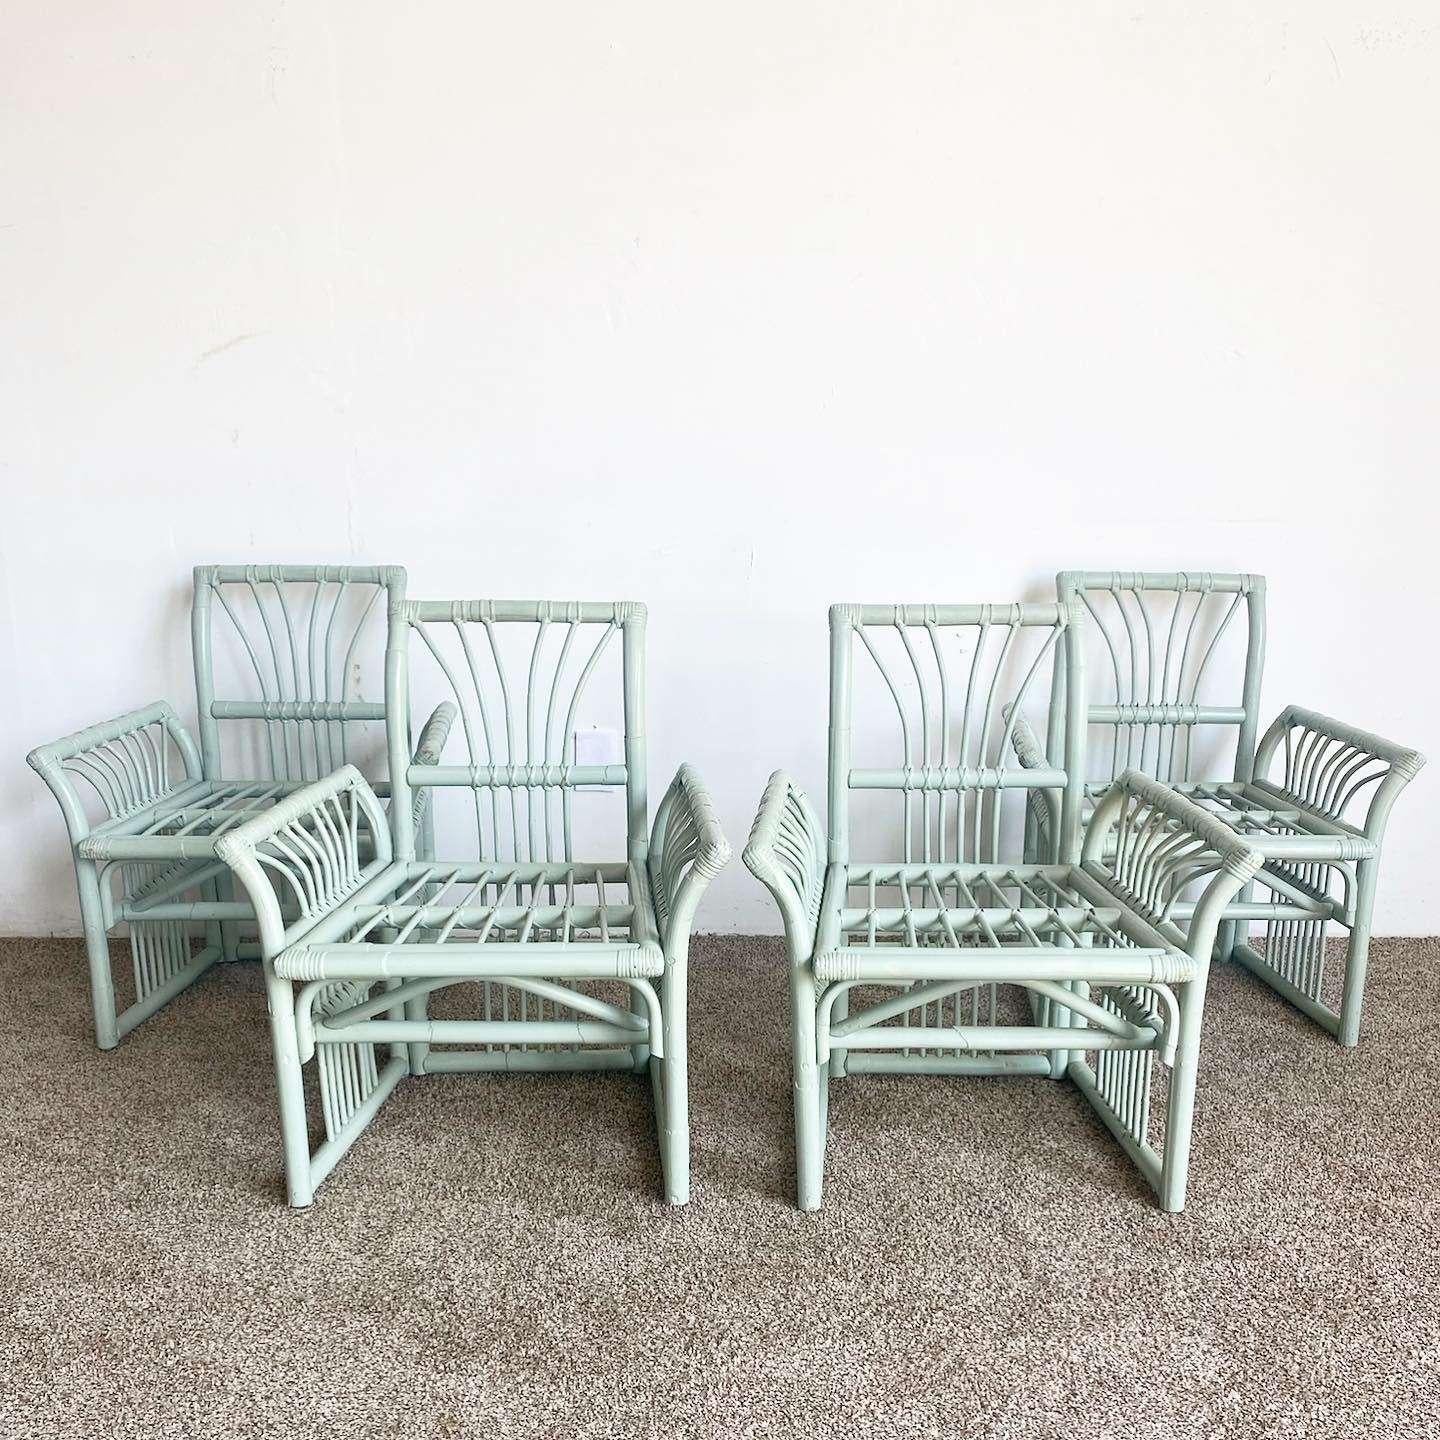 Incredible vintage bohemian bamboo rattan dining set. Set contains 4 exceptional flared arm chairs with a matching dining table base which holds up a large square beveled glass top. The set is finished with a mint green paint.

Table measures 48”W,